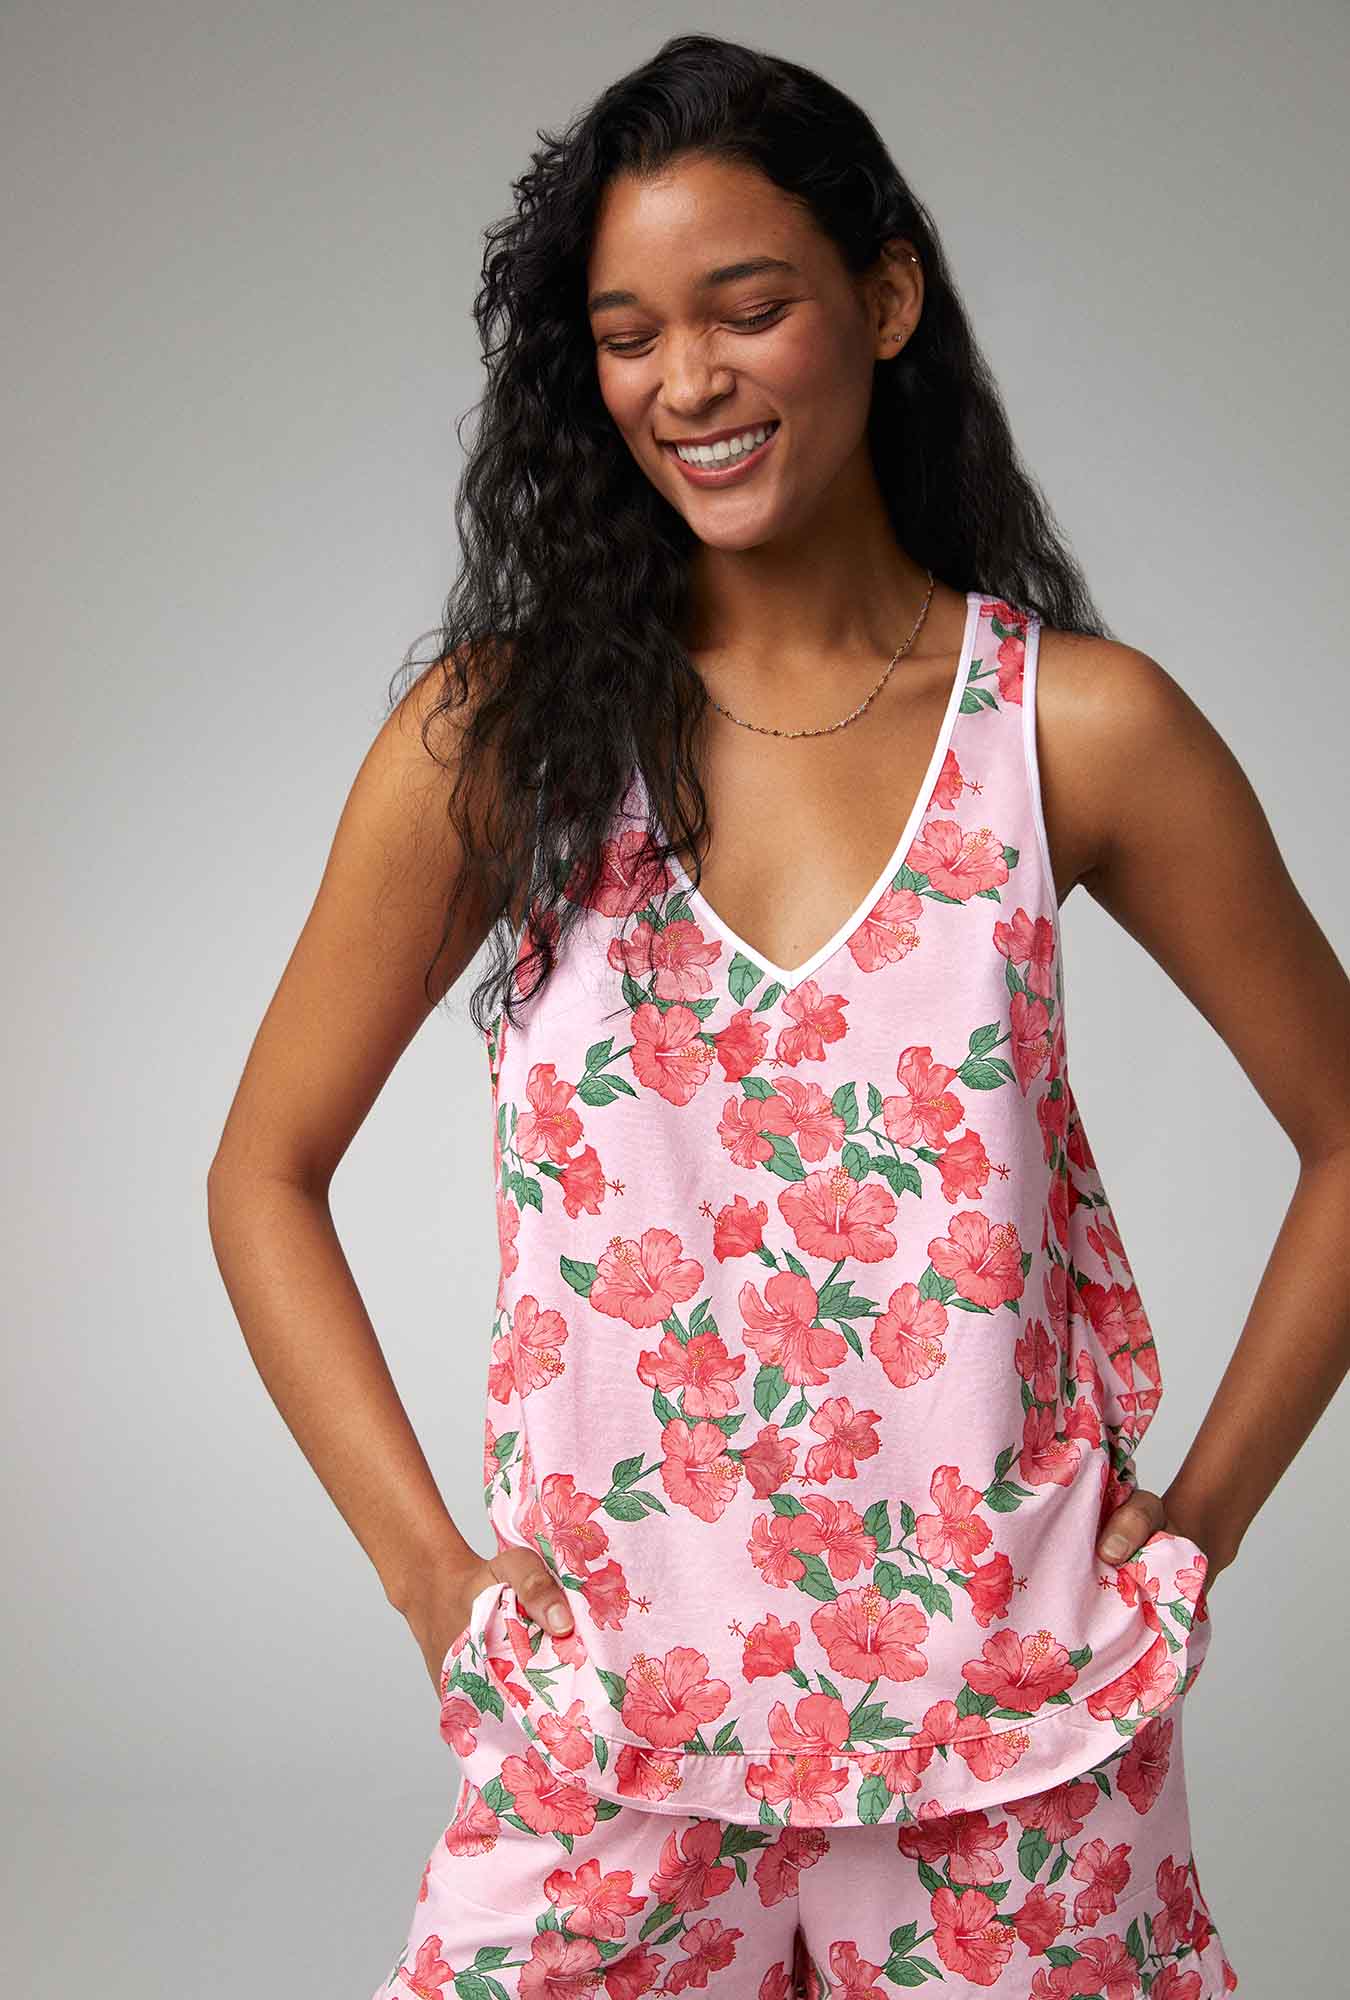 A lady wearing Ruffle Tank Shorty Stretch Jersey PJ Set with Sweet Hibiscus print